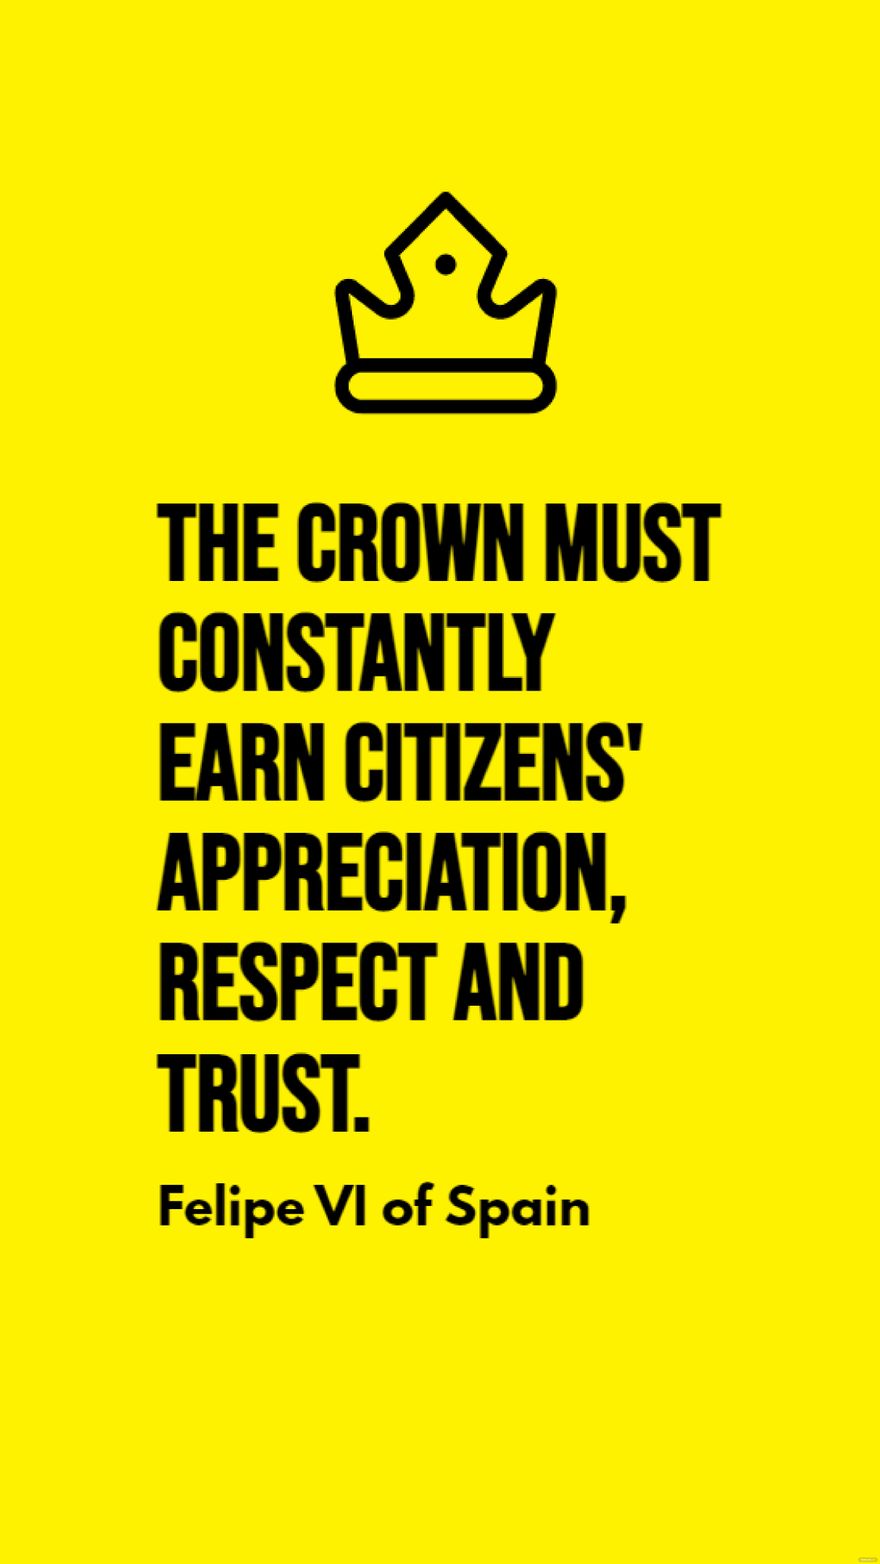 Free Felipe VI of Spain - The crown must constantly earn citizens' appreciation, respect and trust. in JPG